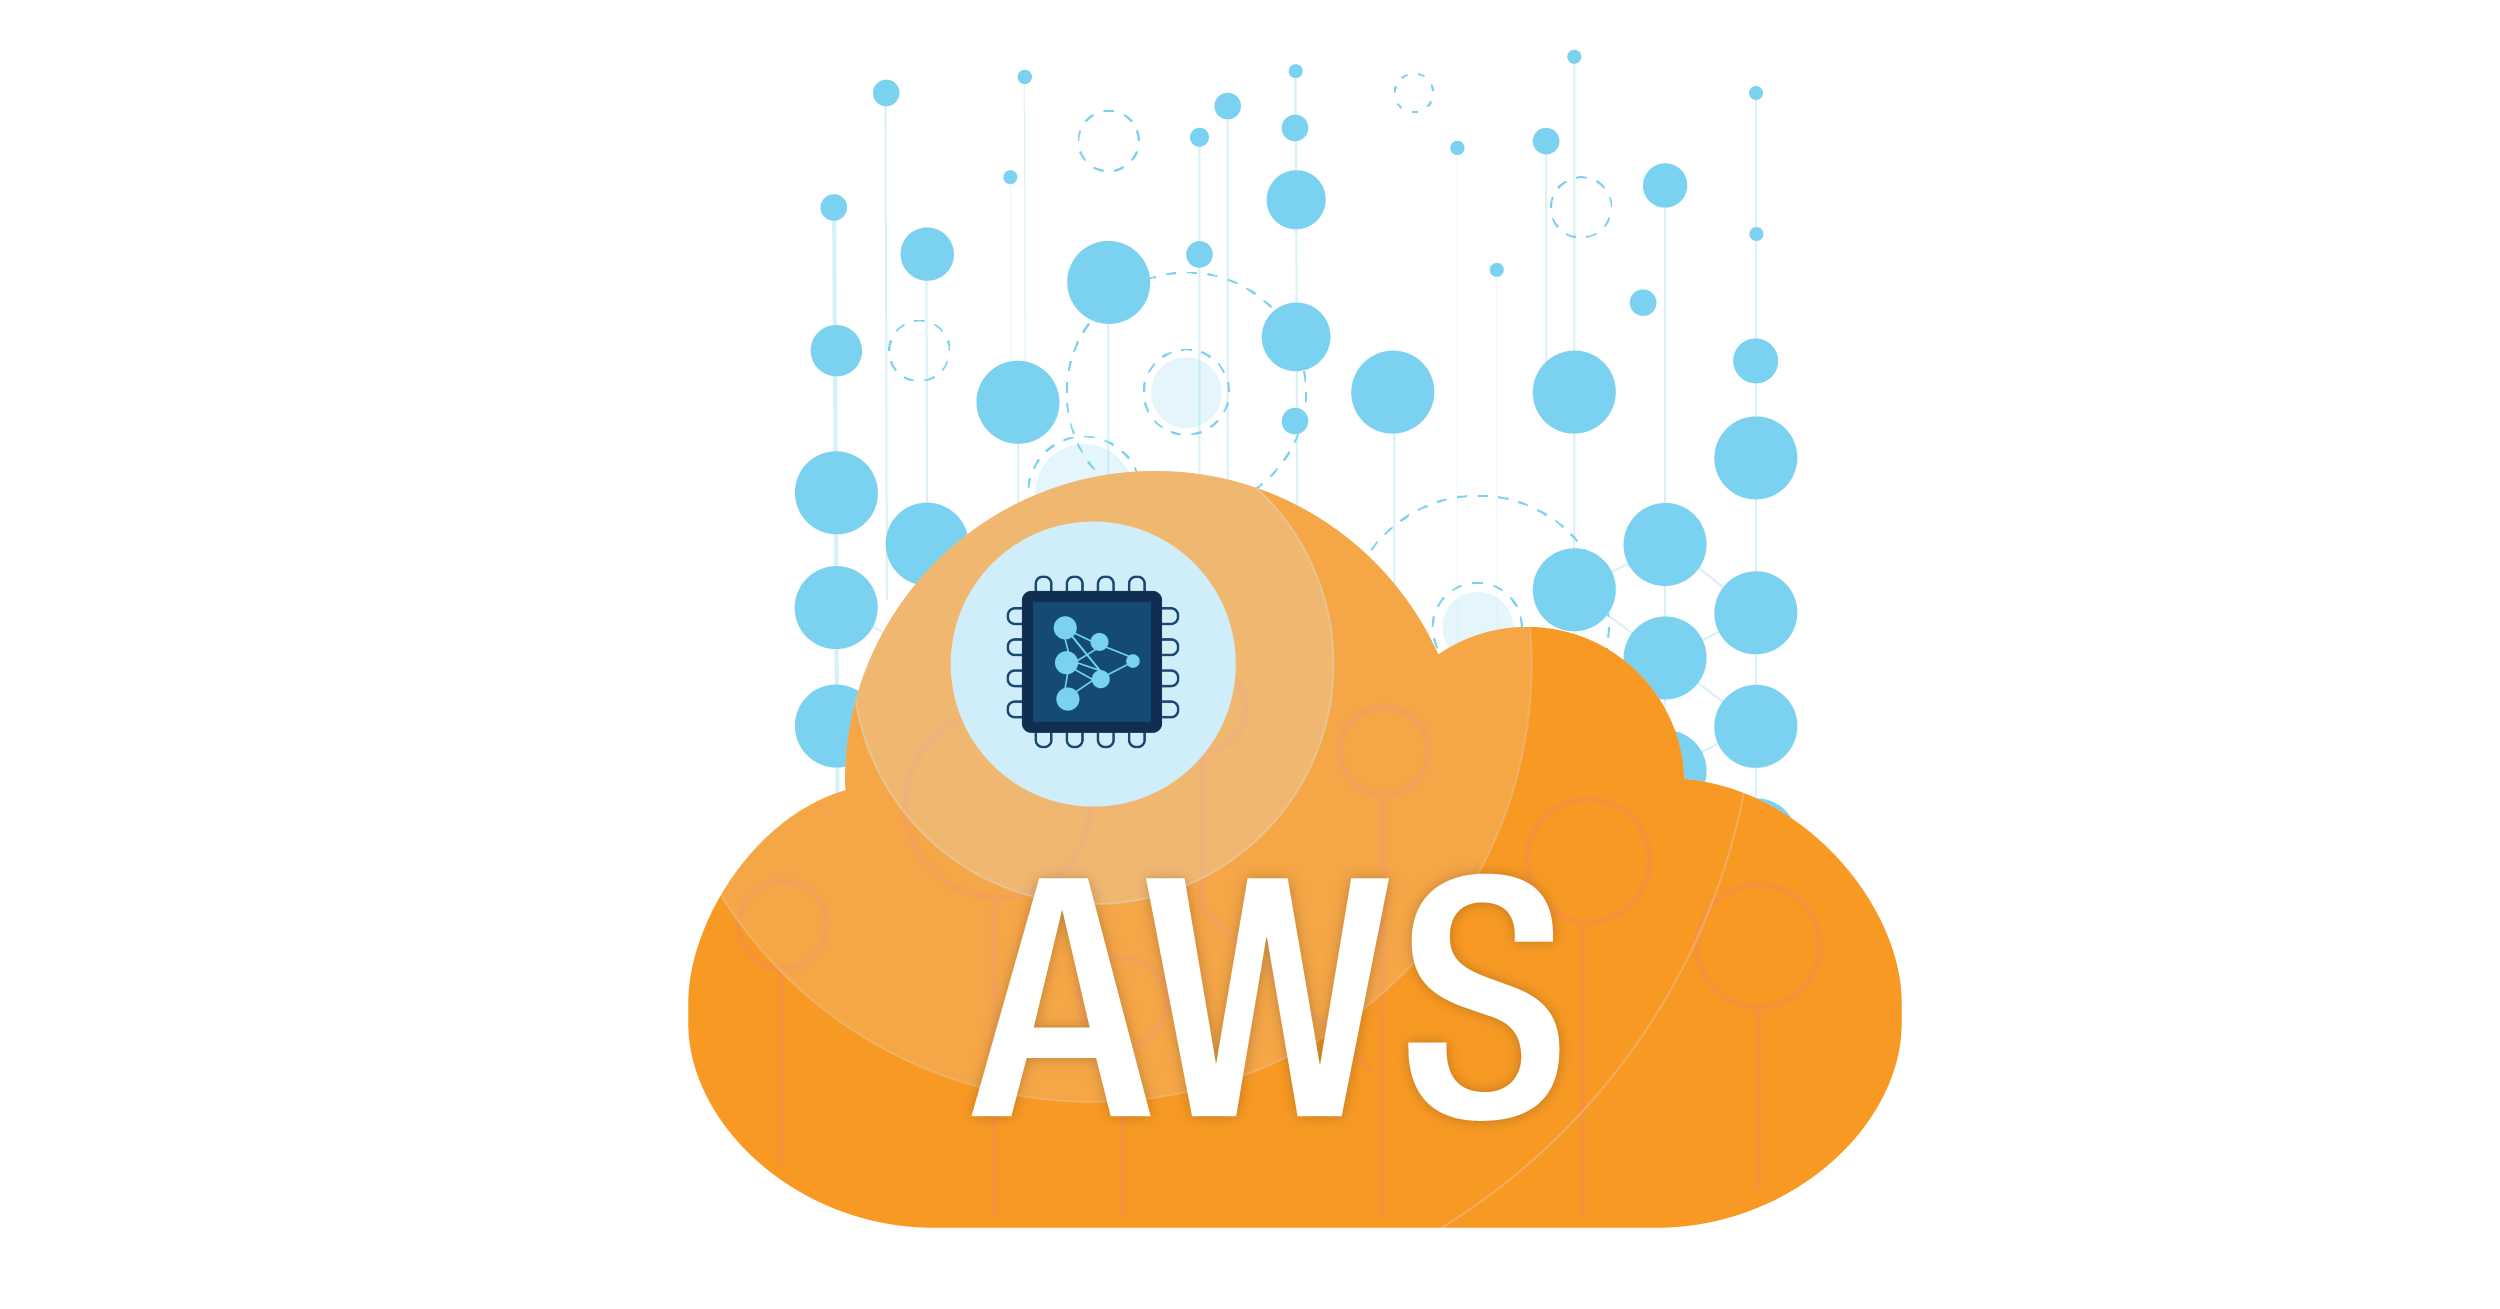 Deploy Serverless Machine Learning Inference on AWS with DeepSparse